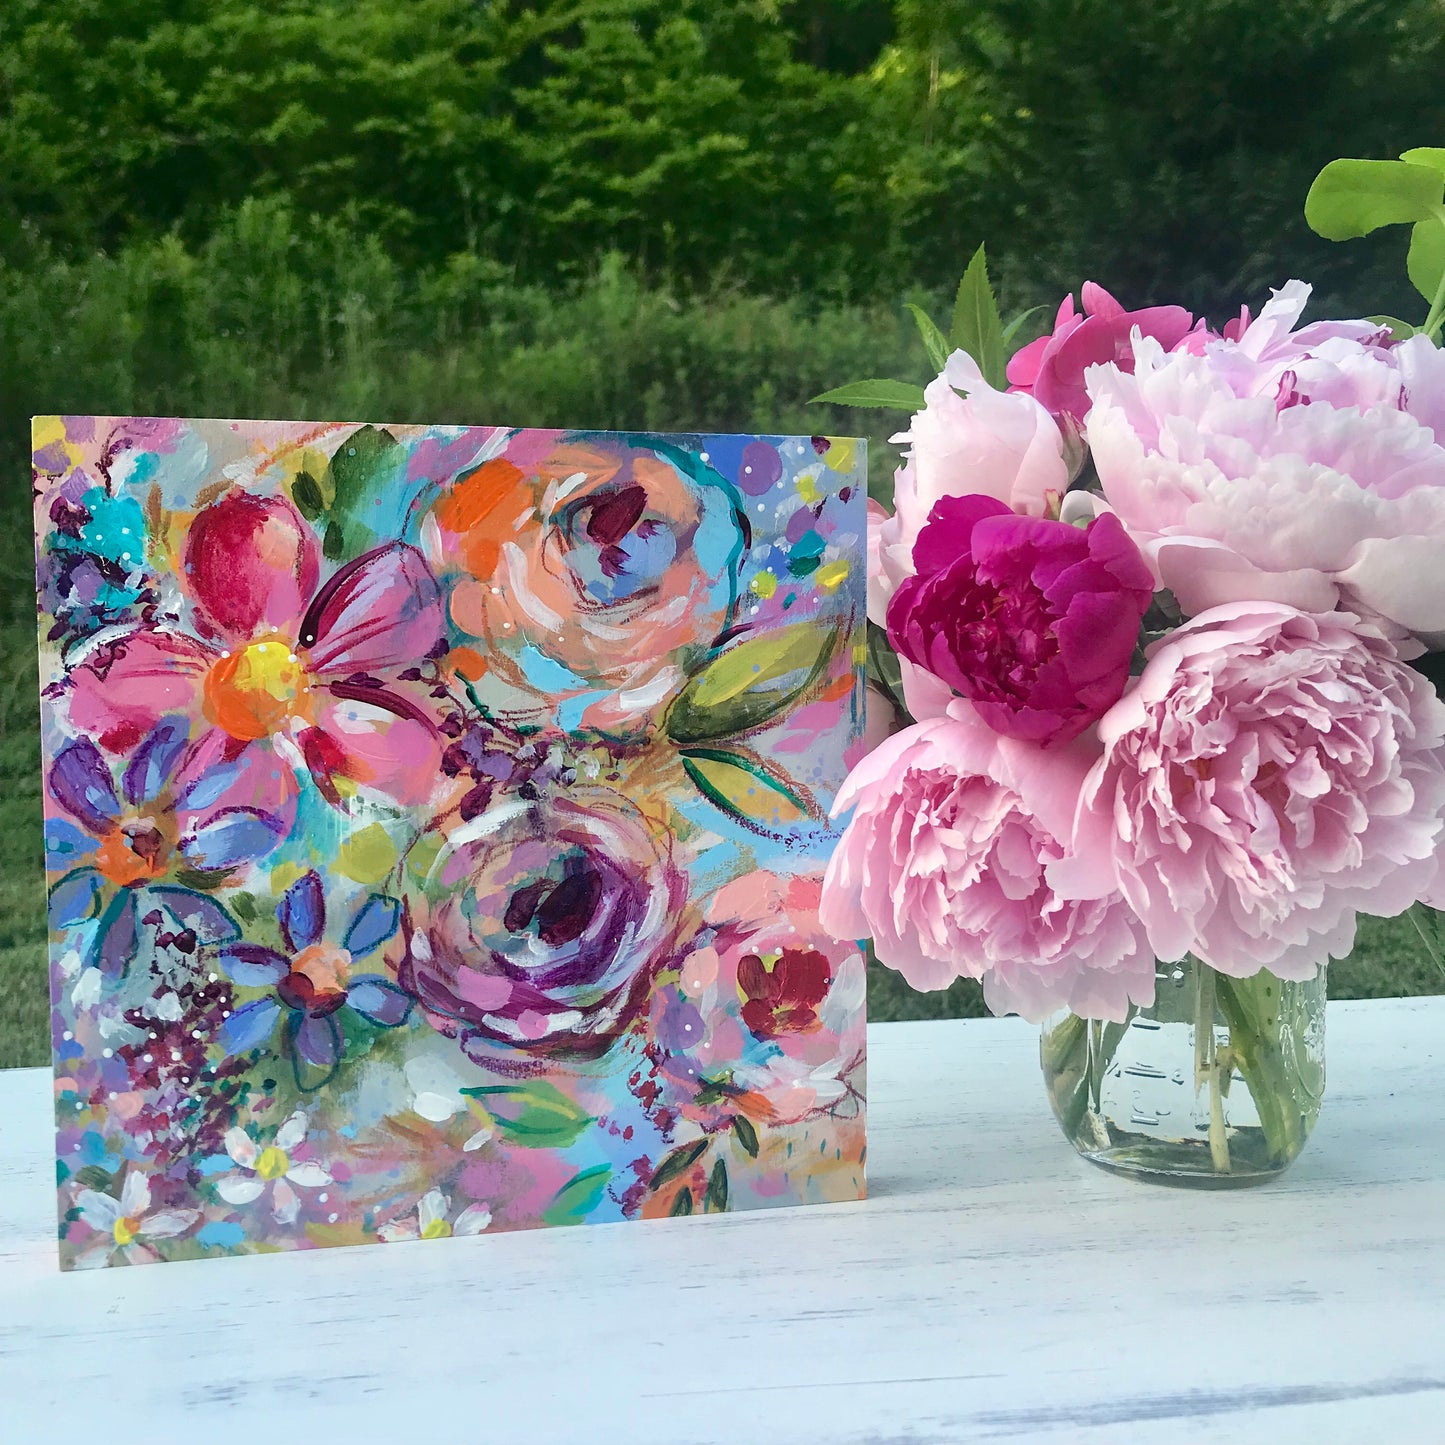 New Spring Floral Mixed Media Painting on 8x8 inch wood panel no.4 - Bethany Joy Art